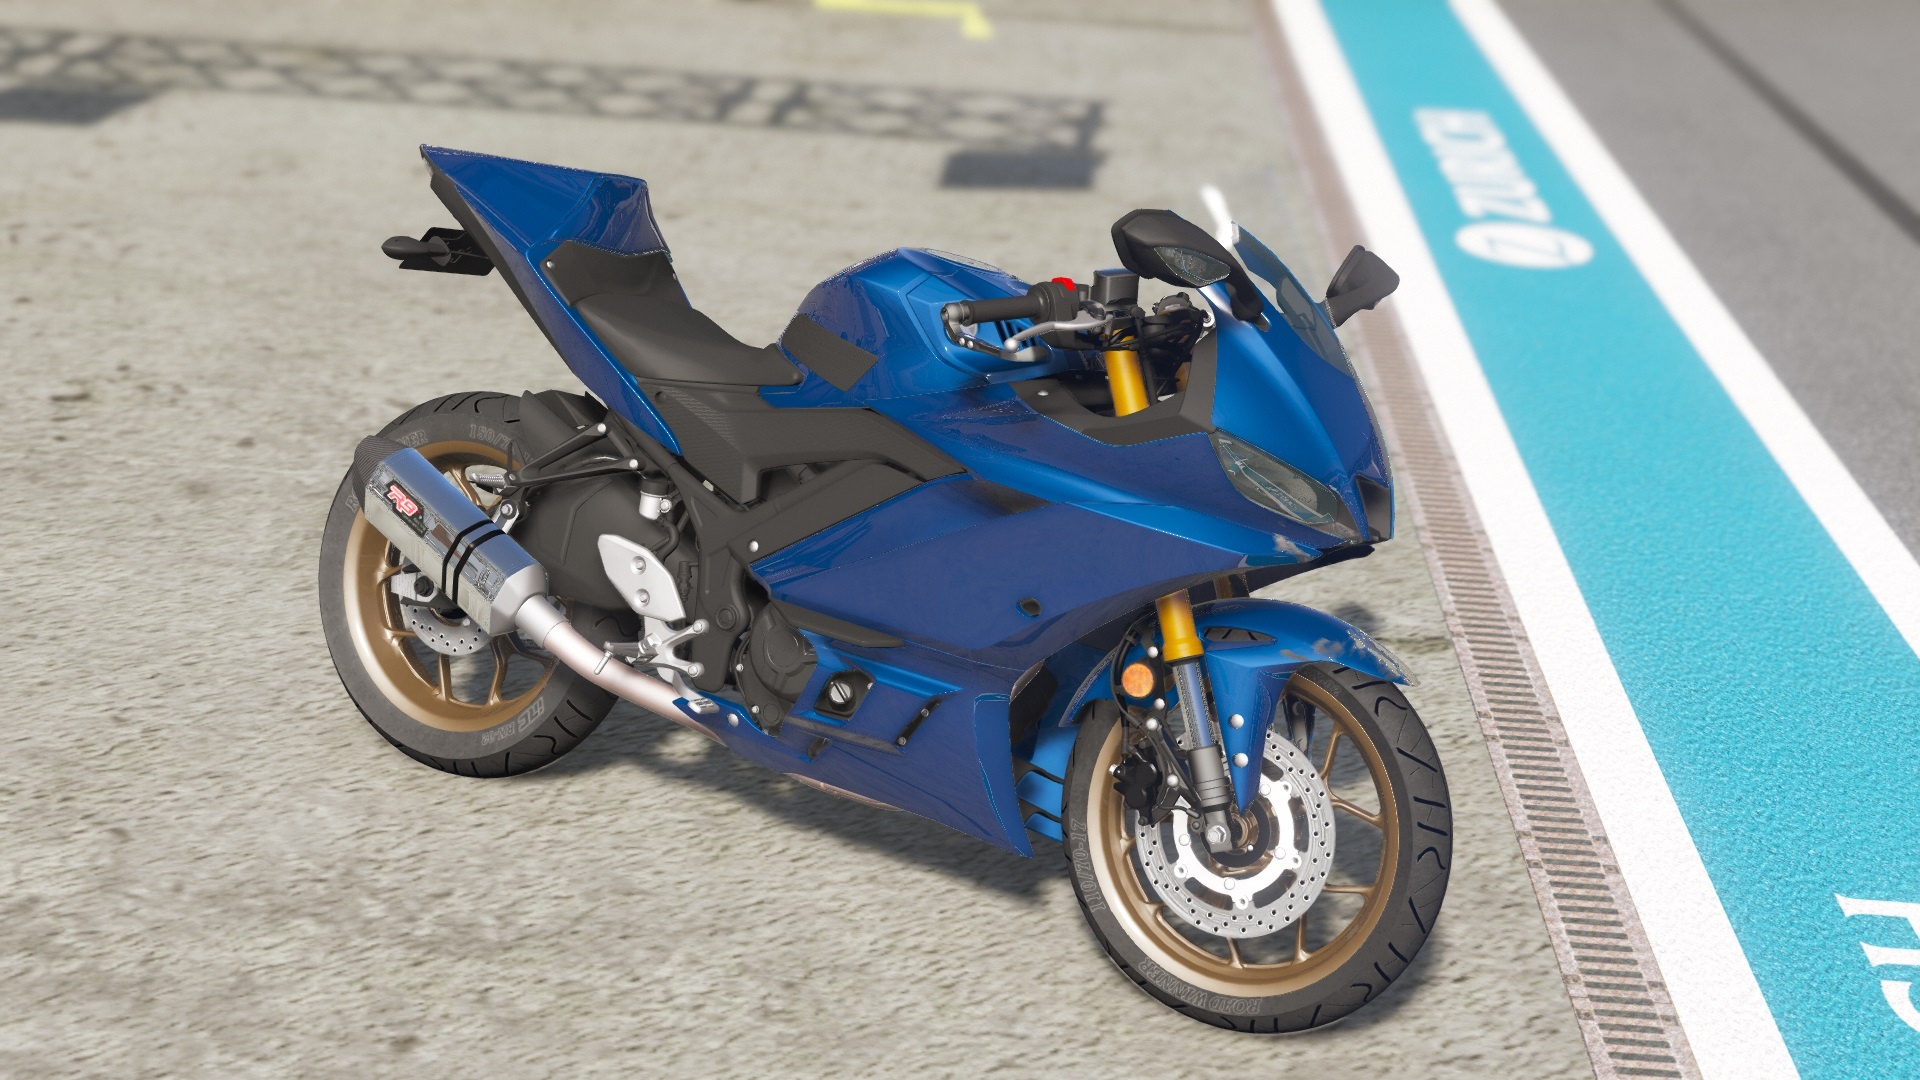 0dd913 Grand Theft Auto V 01 03 2019 09 13 - Yamaha R25 2019 Modified , HD Wallpaper & Backgrounds